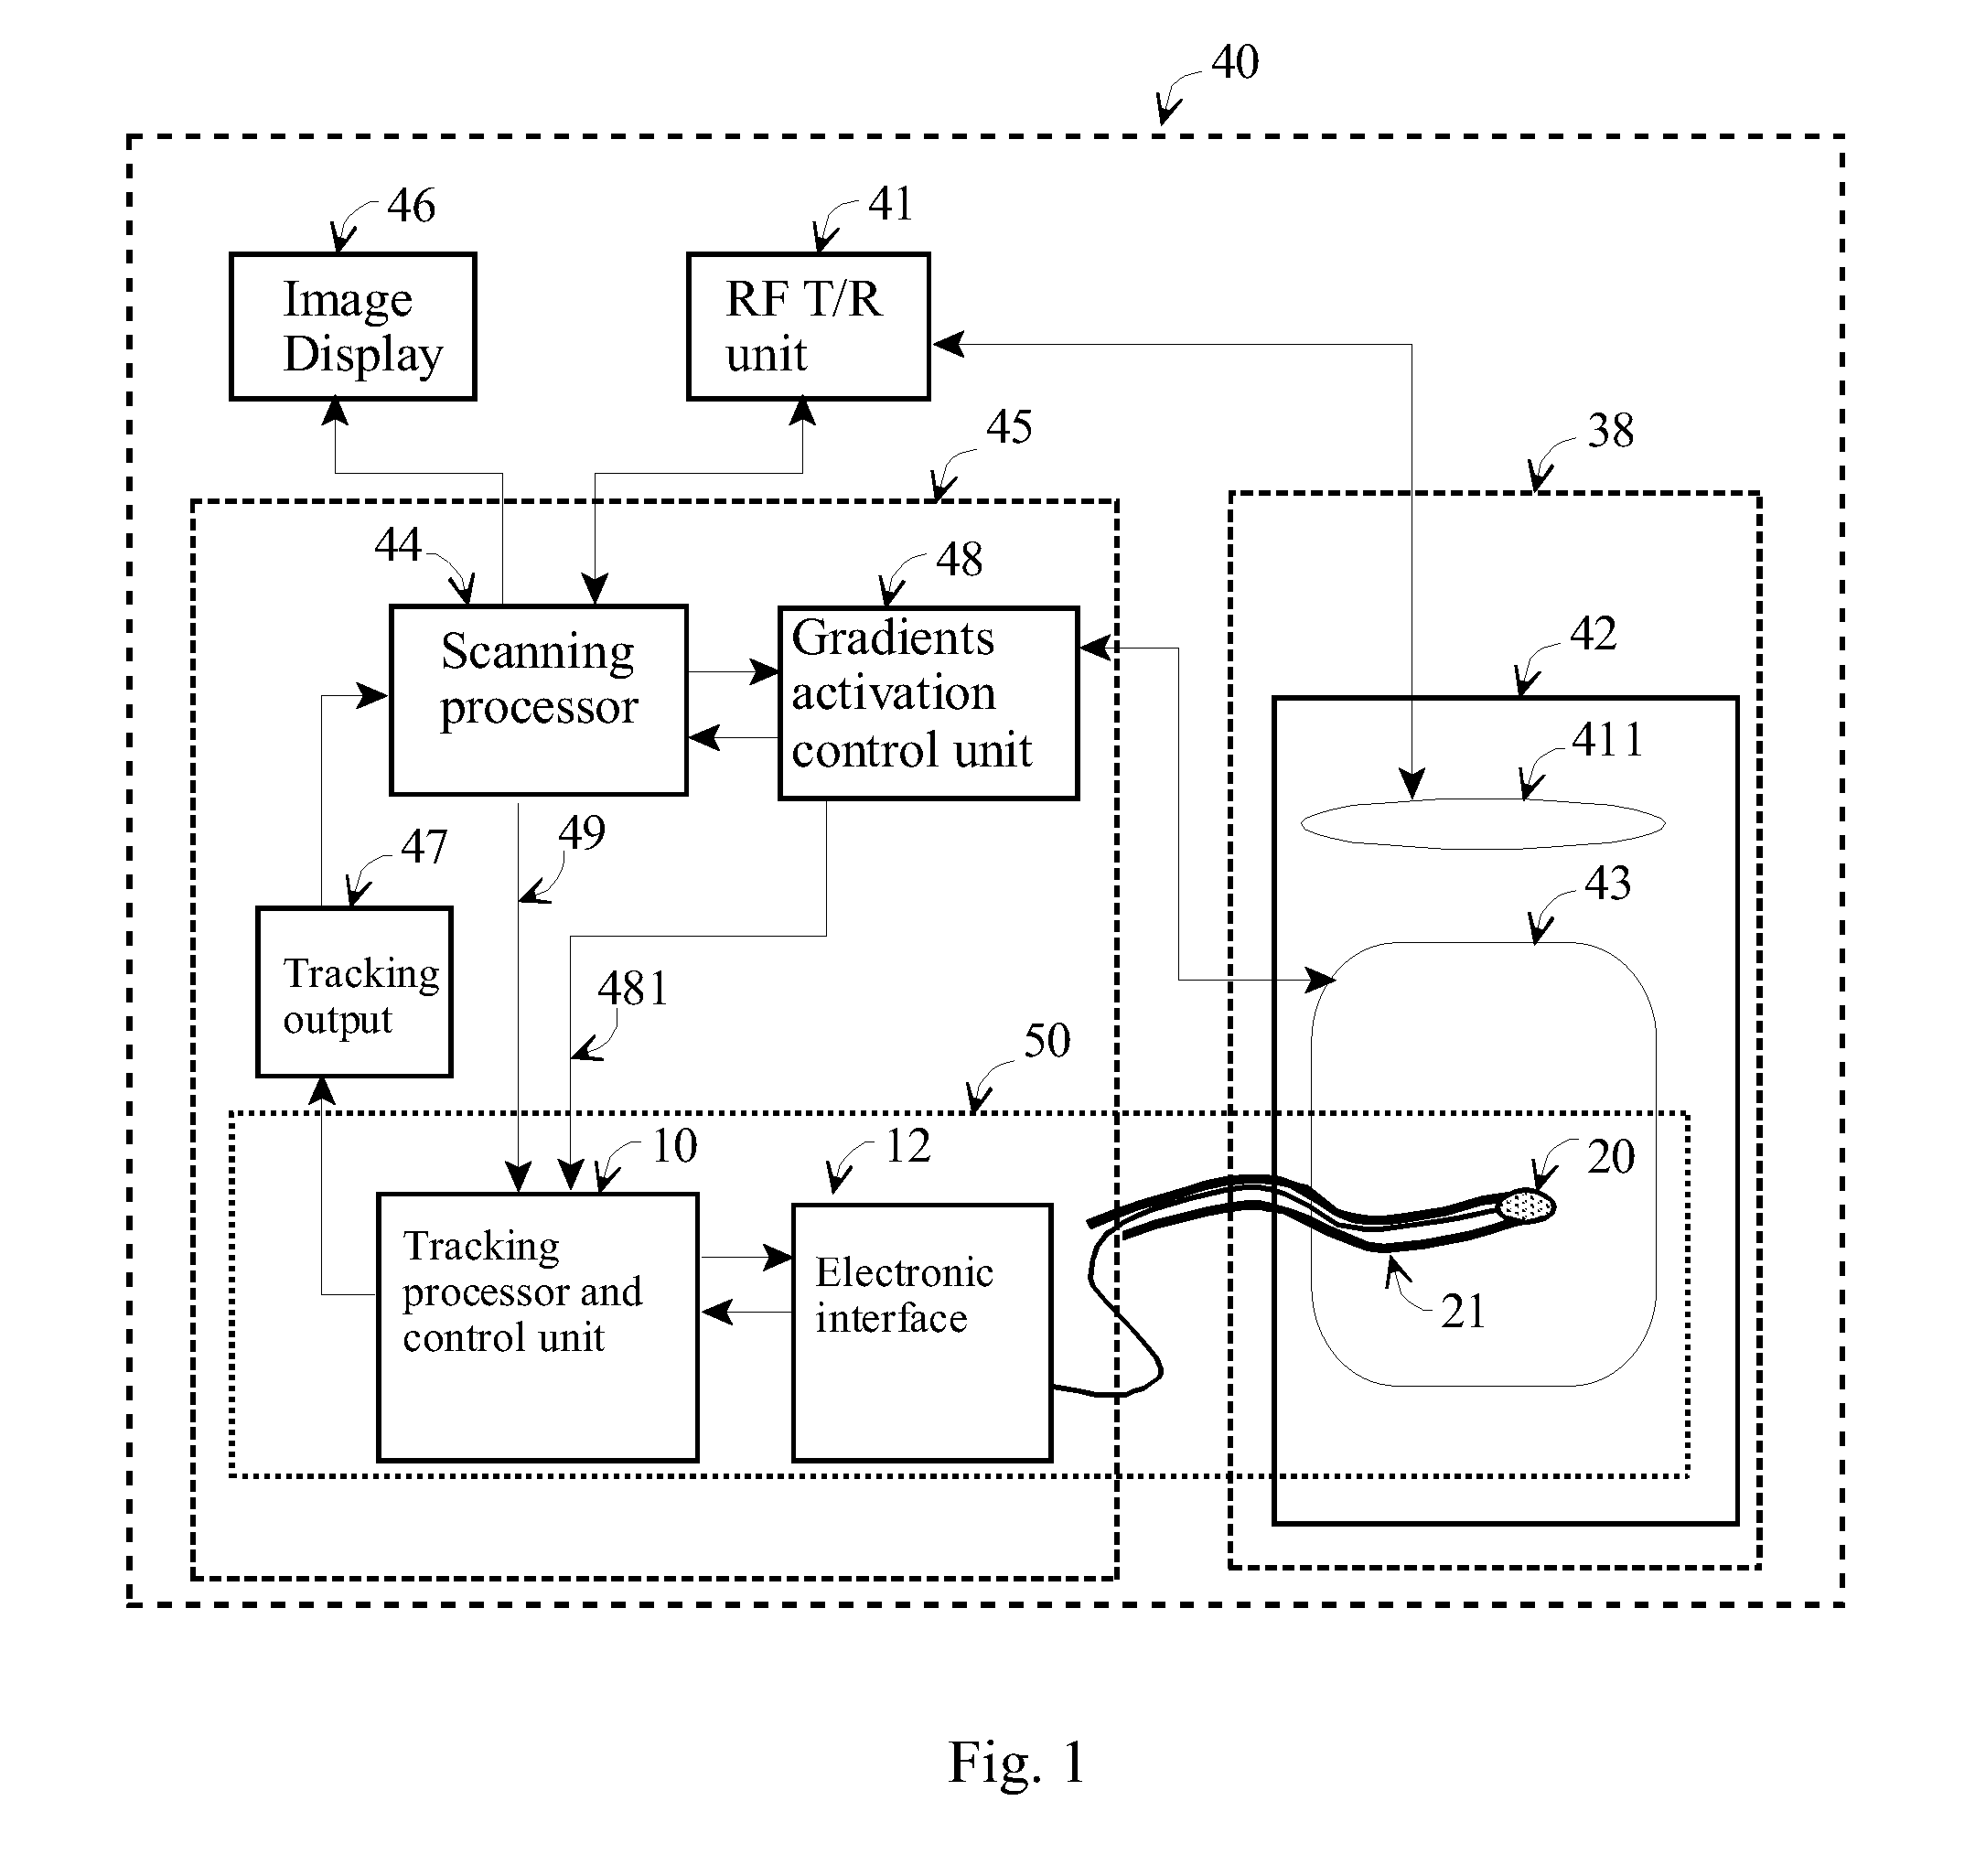 Method and apparatus to estimate location and orientation of objects during magnetic resonance imaging